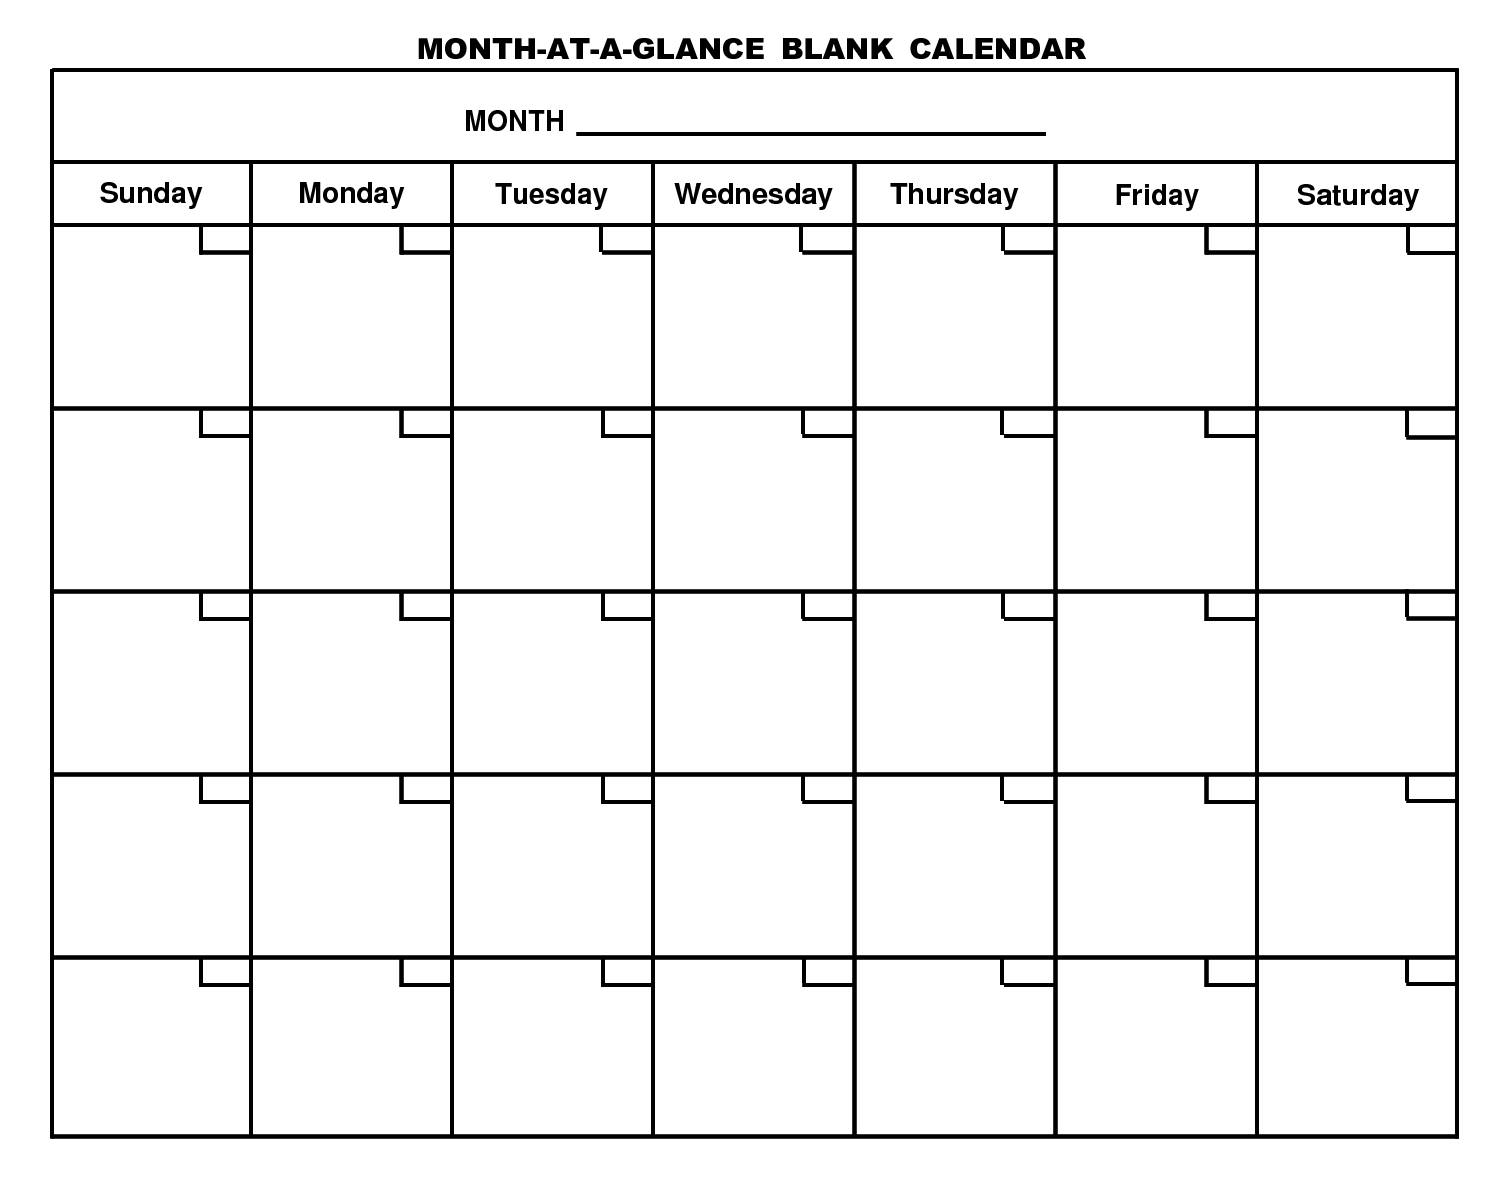 How Can I Print A Blank Monthly Calendar From My Ipad